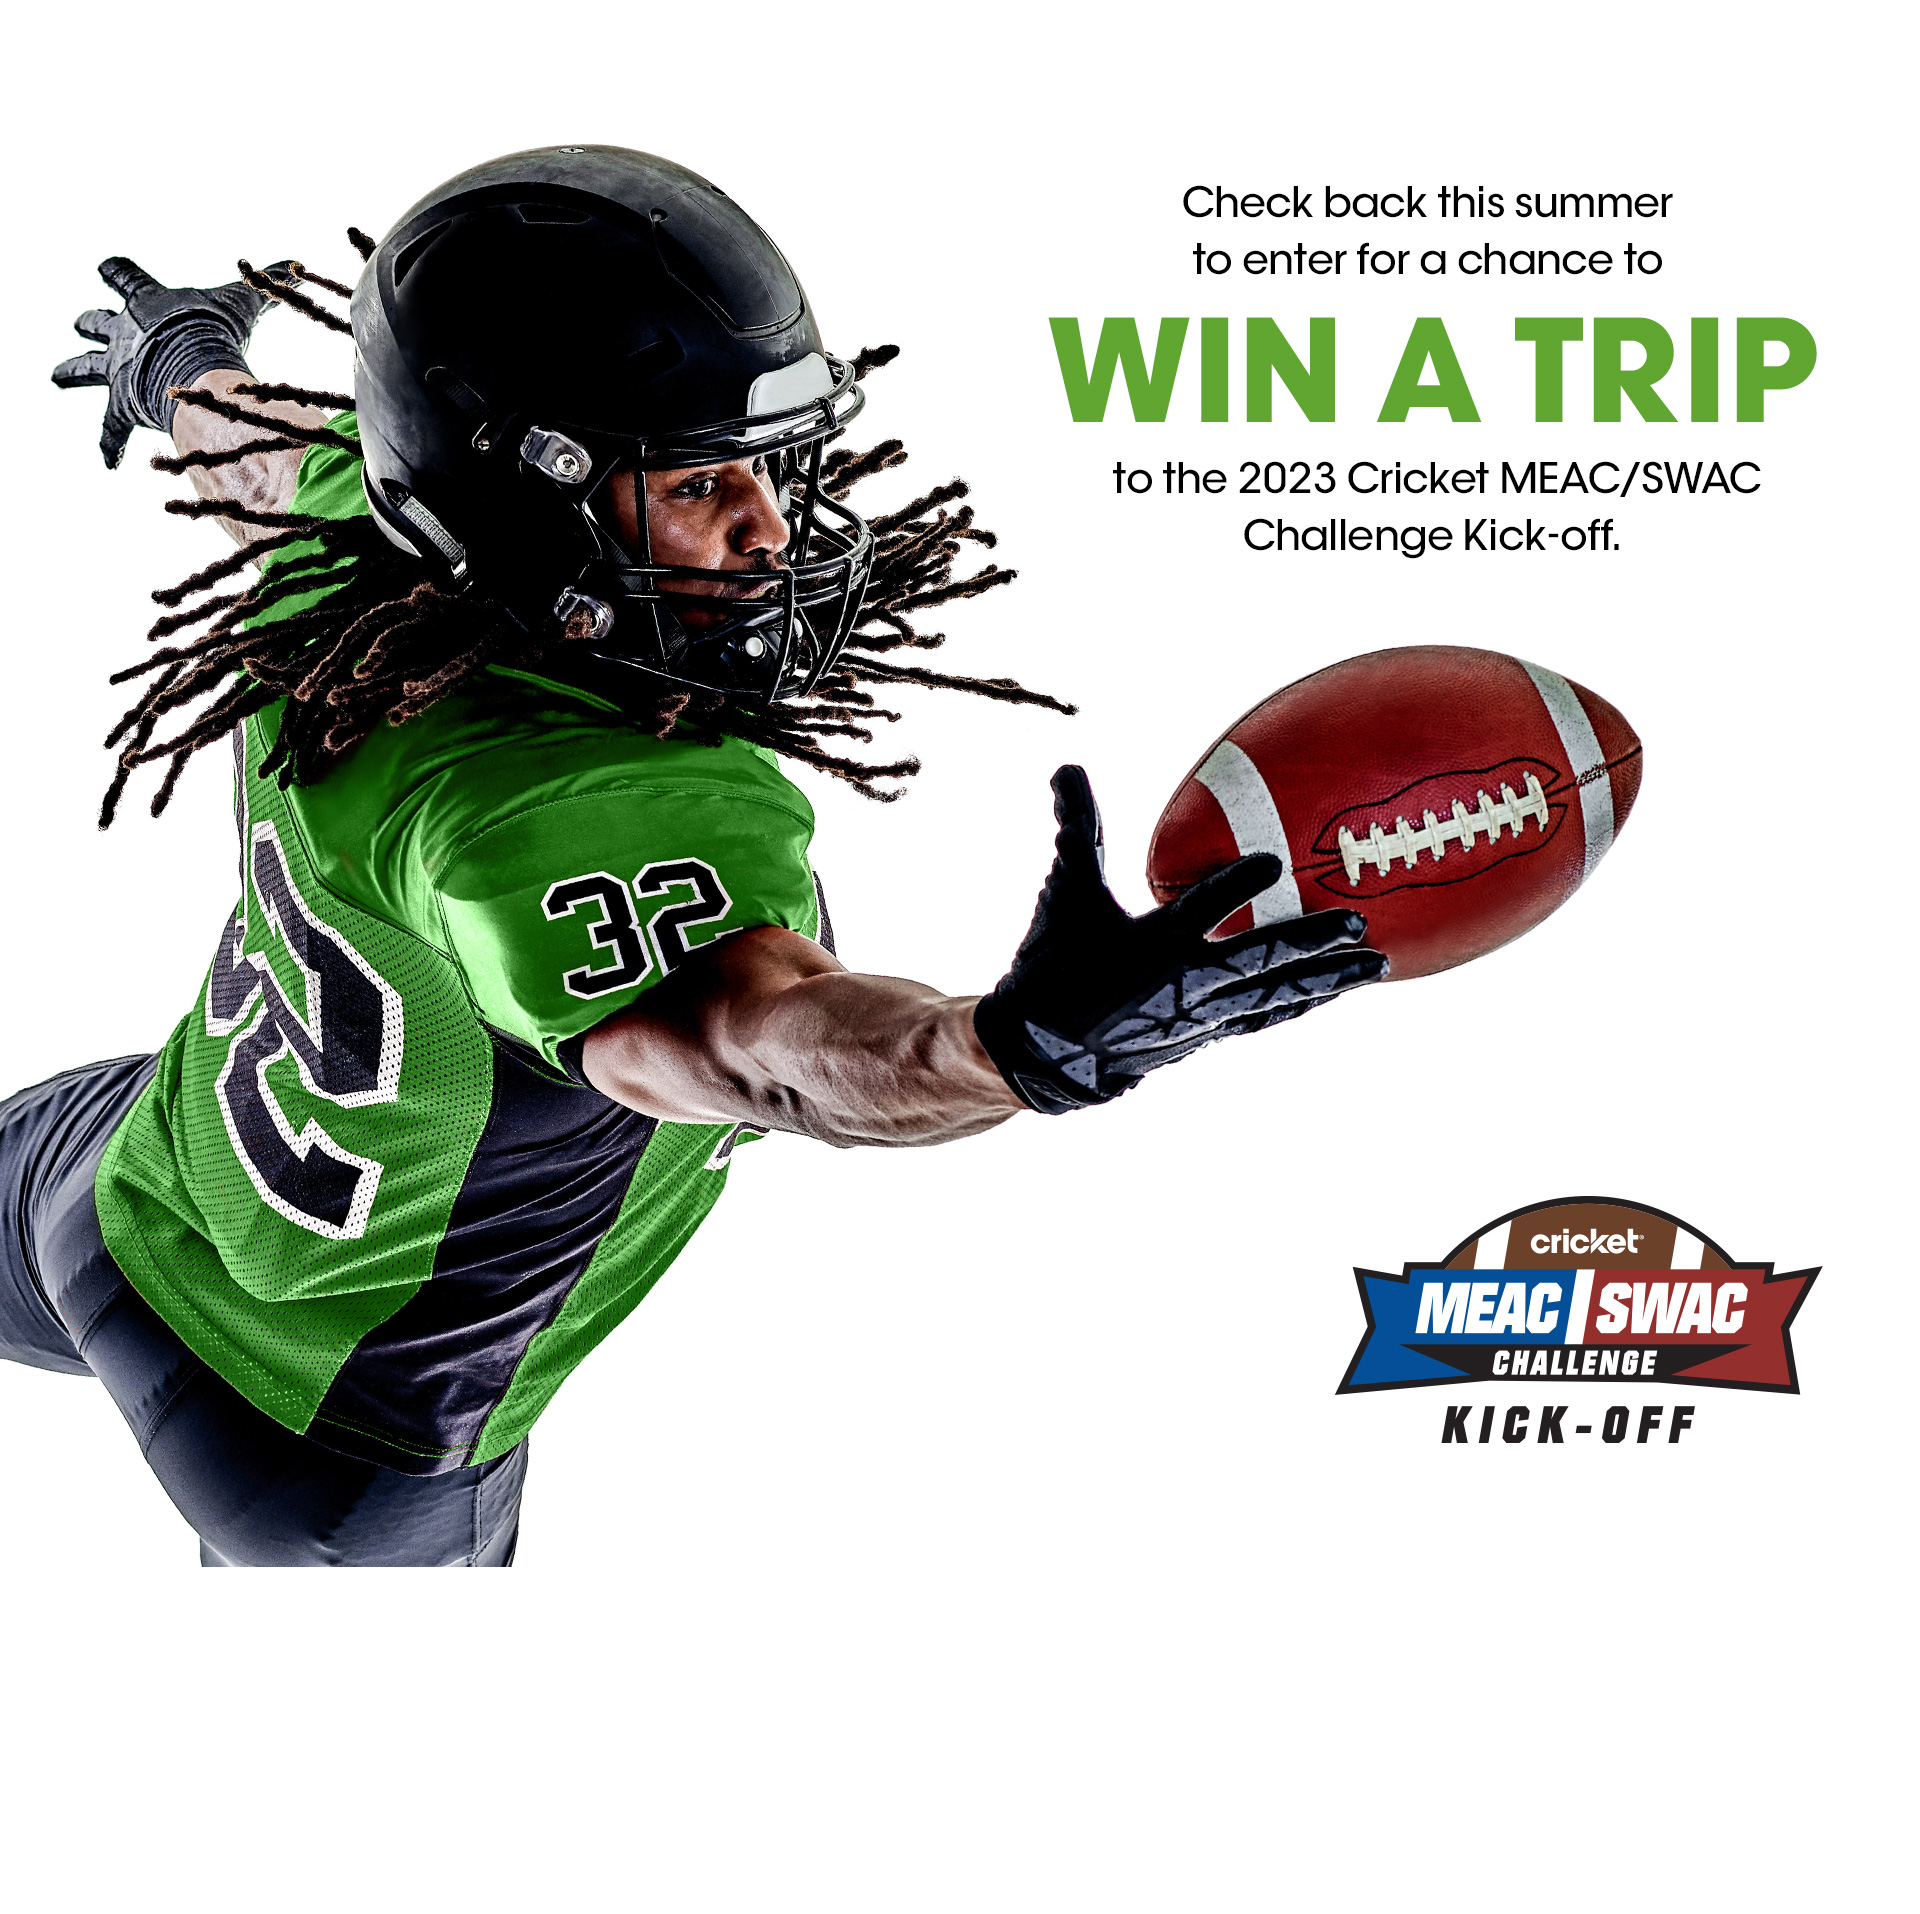 Check back this summer to enter for a chance to win a trip to the 2023 Cricket MEAC/SWAC Challenge Kick-off.